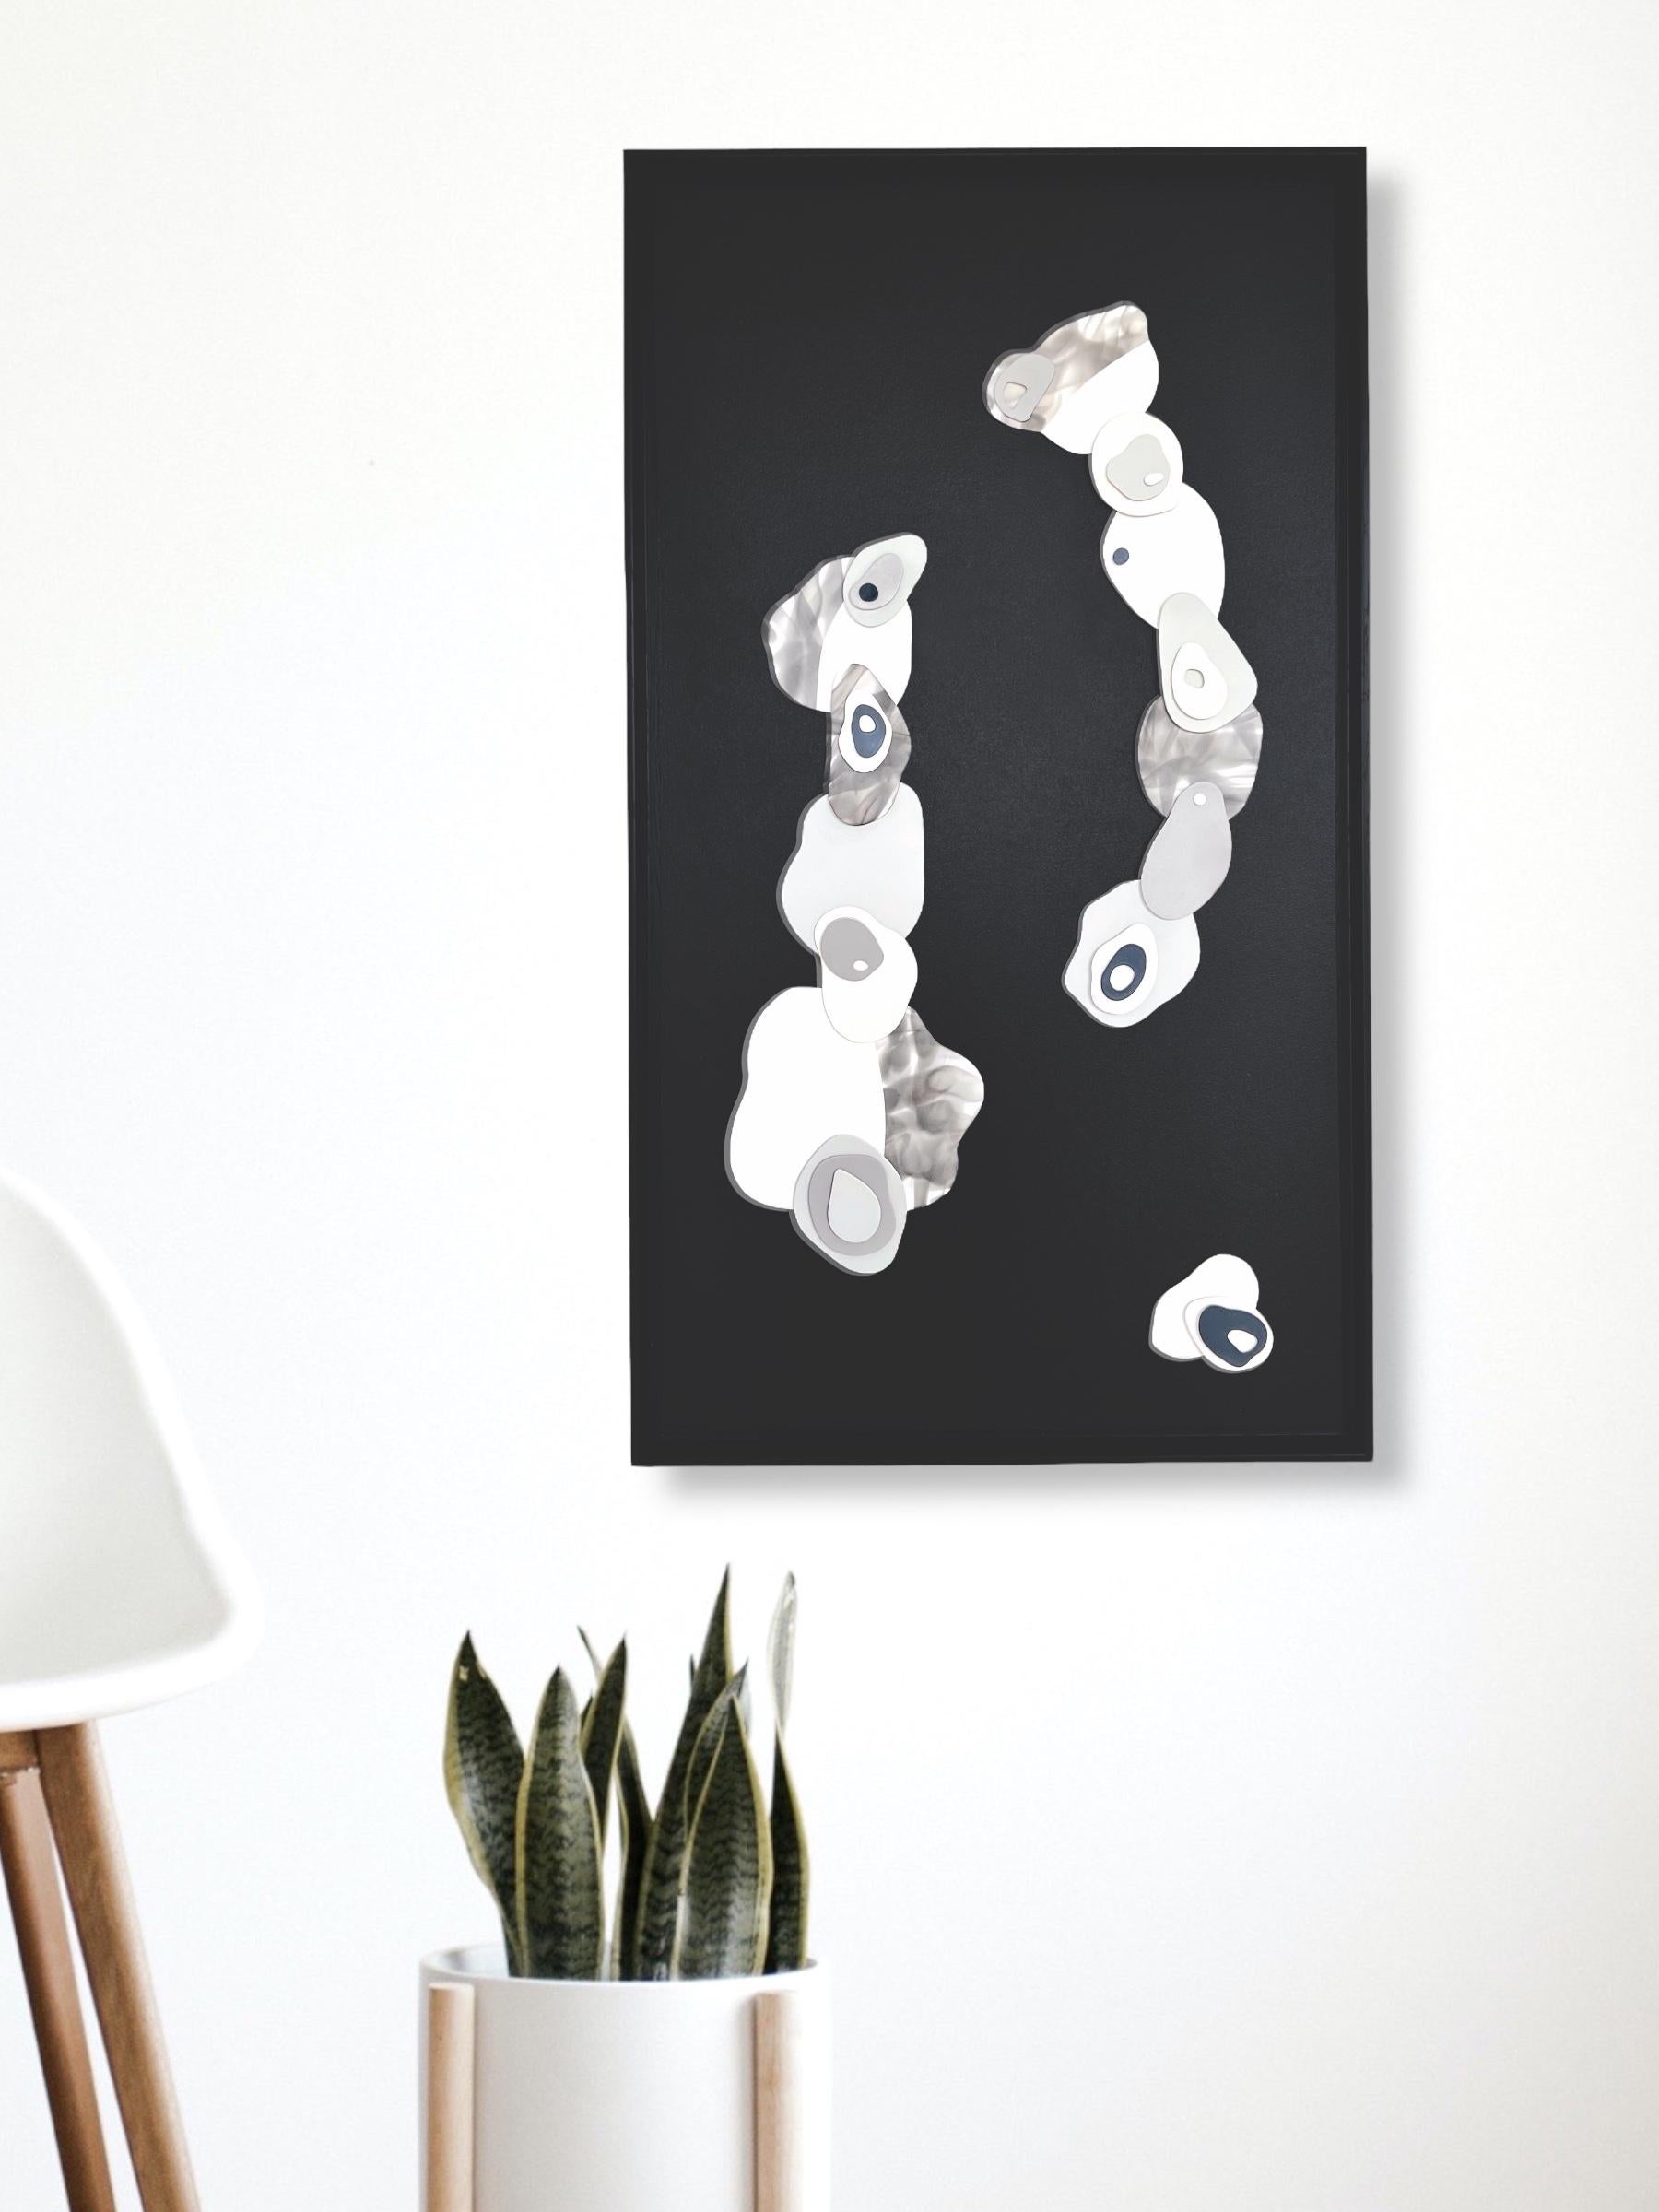 Clouds I . 2022 
Mixed Media abstract, minimalistic, 3D painting on wood panel mounted on a deep floater black frame37H x 21W x 2D  
It is a 3D painting, composed of small pieces of plaster painted with neutral colors as well as smoke. The plaster